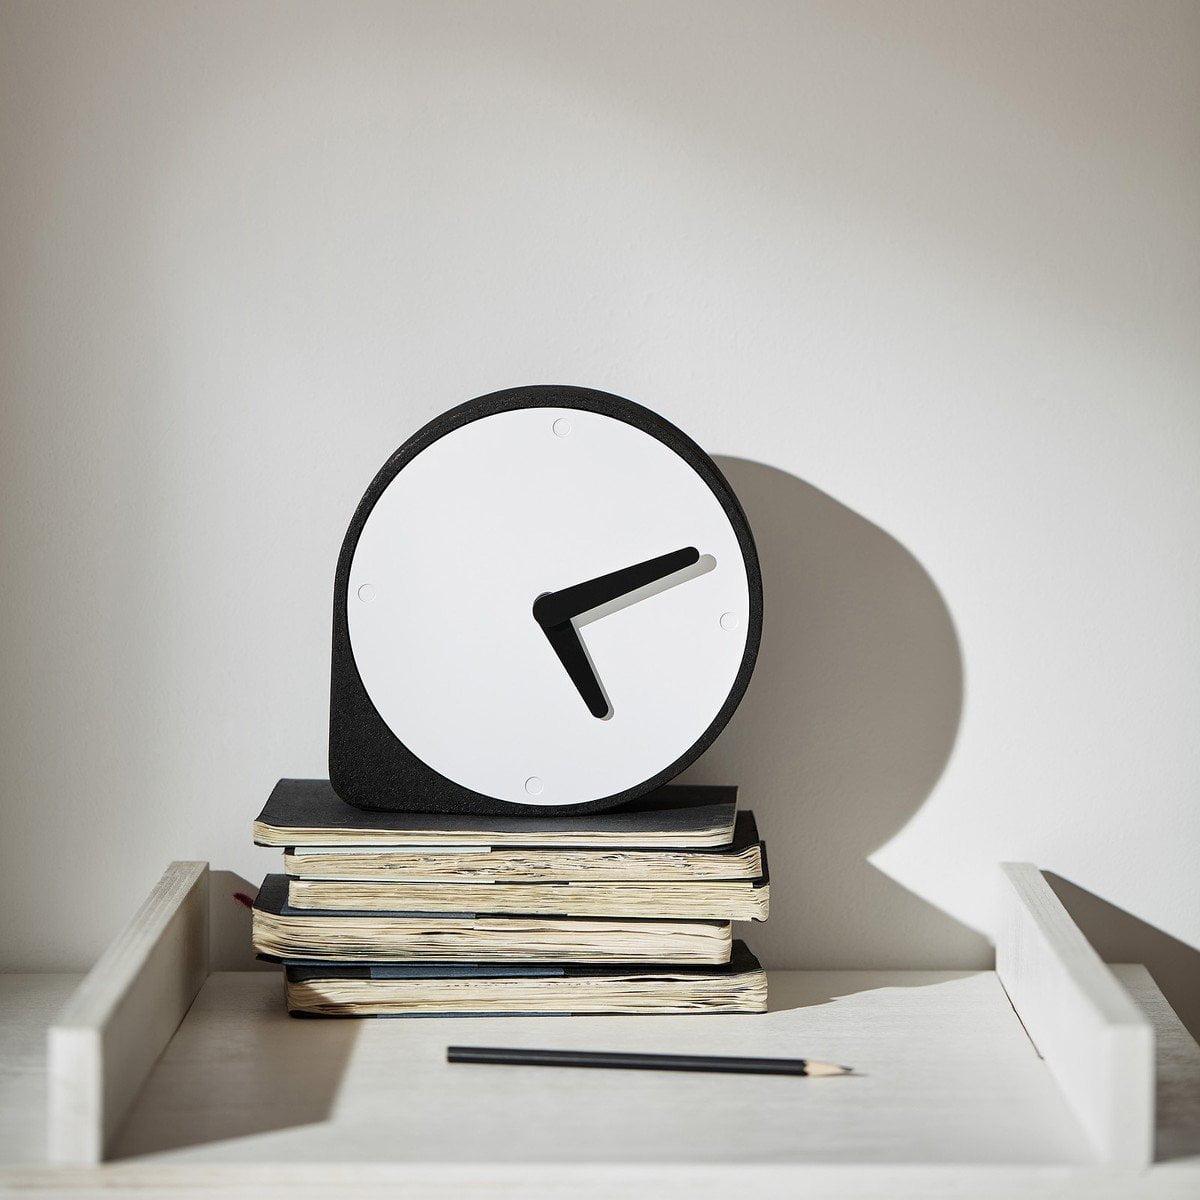 A Puik Clork Table Clock, Black, with an asymmetrical shape, sits on top of a stack of books.